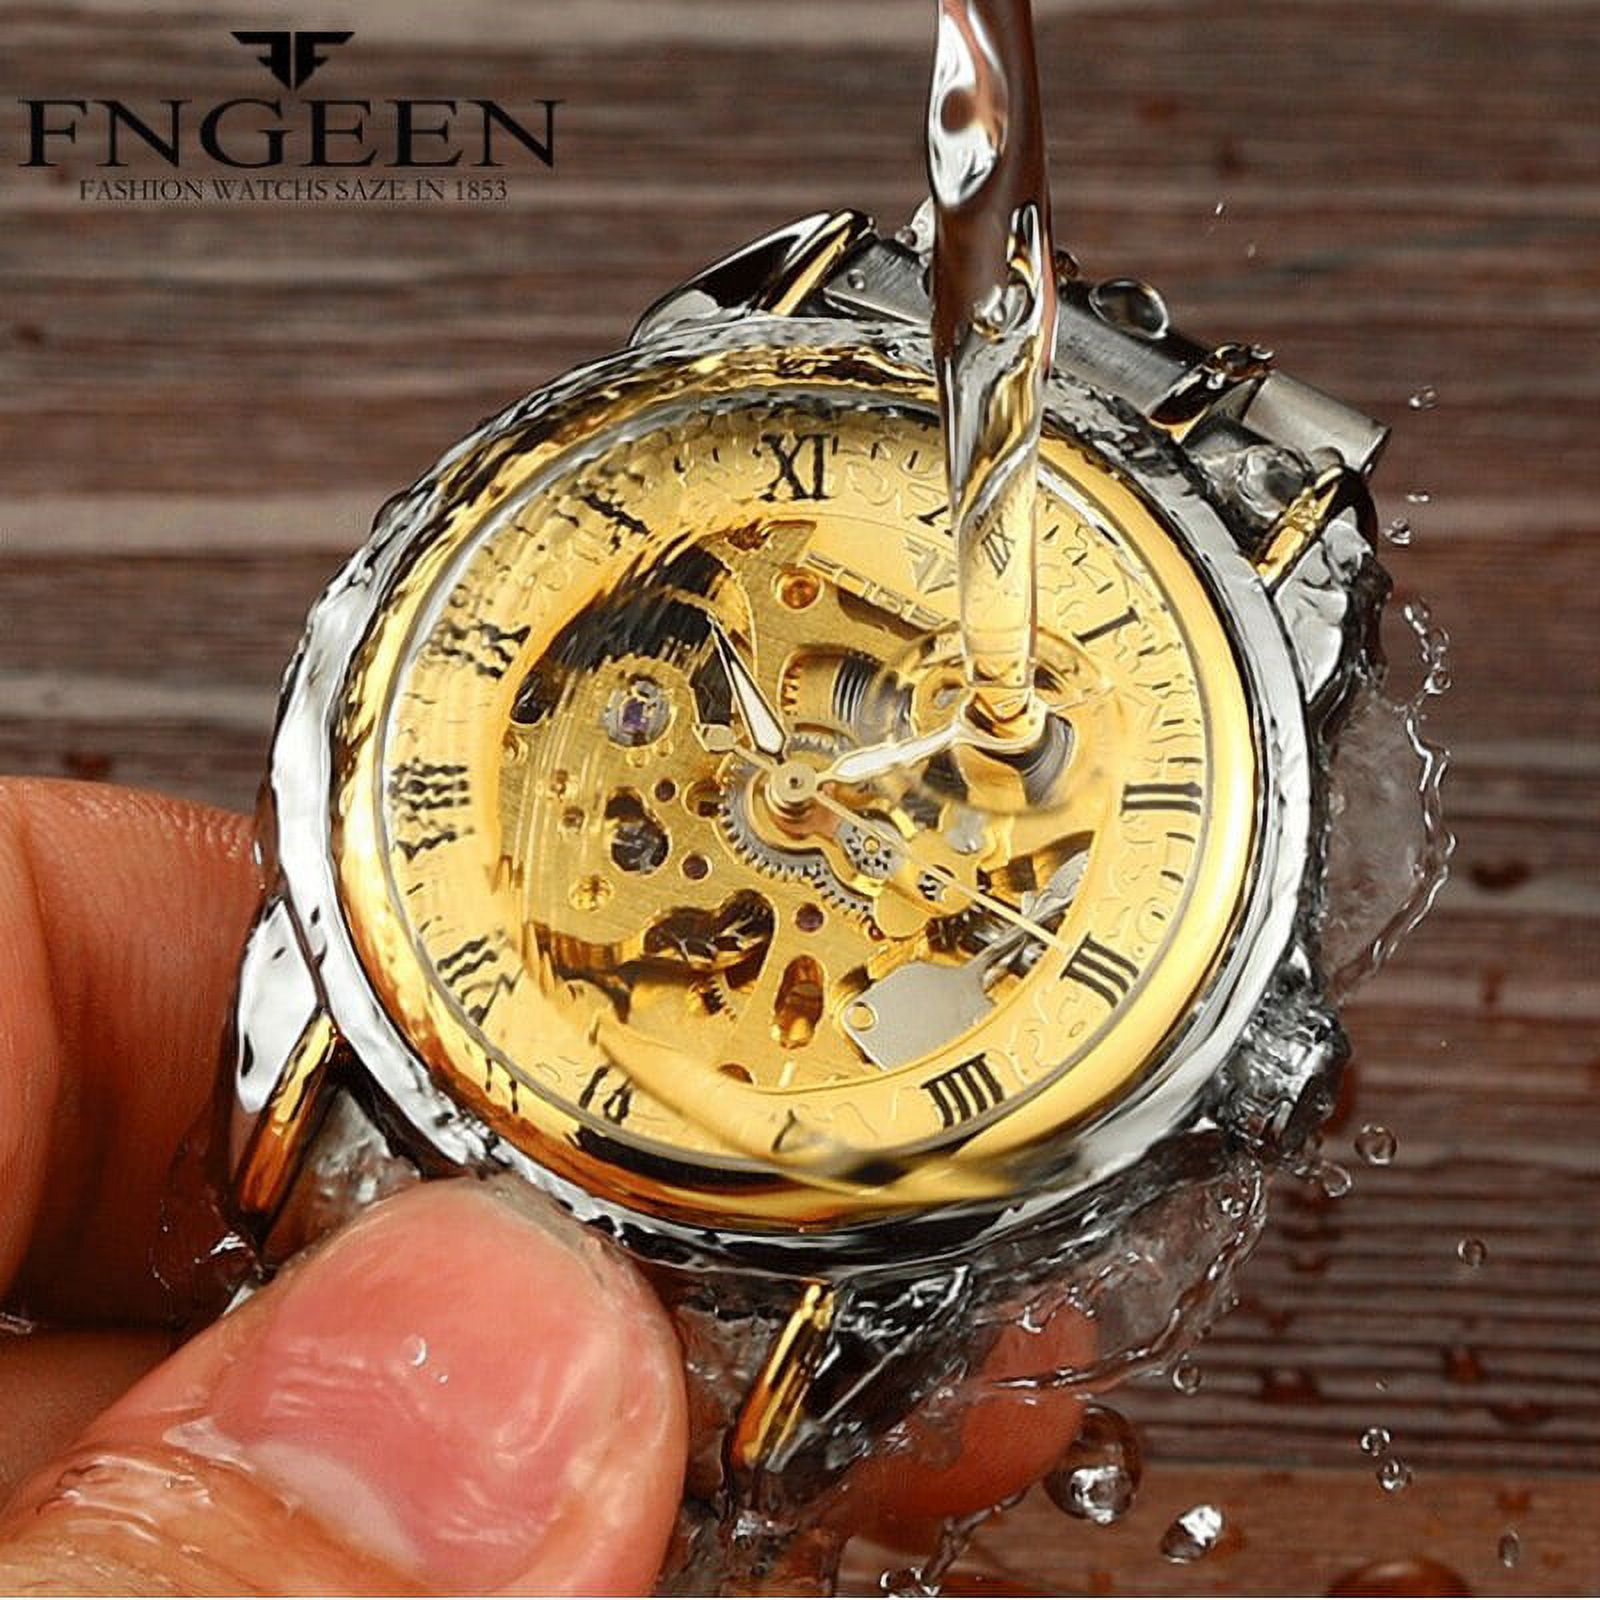 Fngeen Brand Men's Watch Waterproof Fashion Student Men's Watch Double-Sided Hollow Automatic Mechanical Watch - image 4 of 6